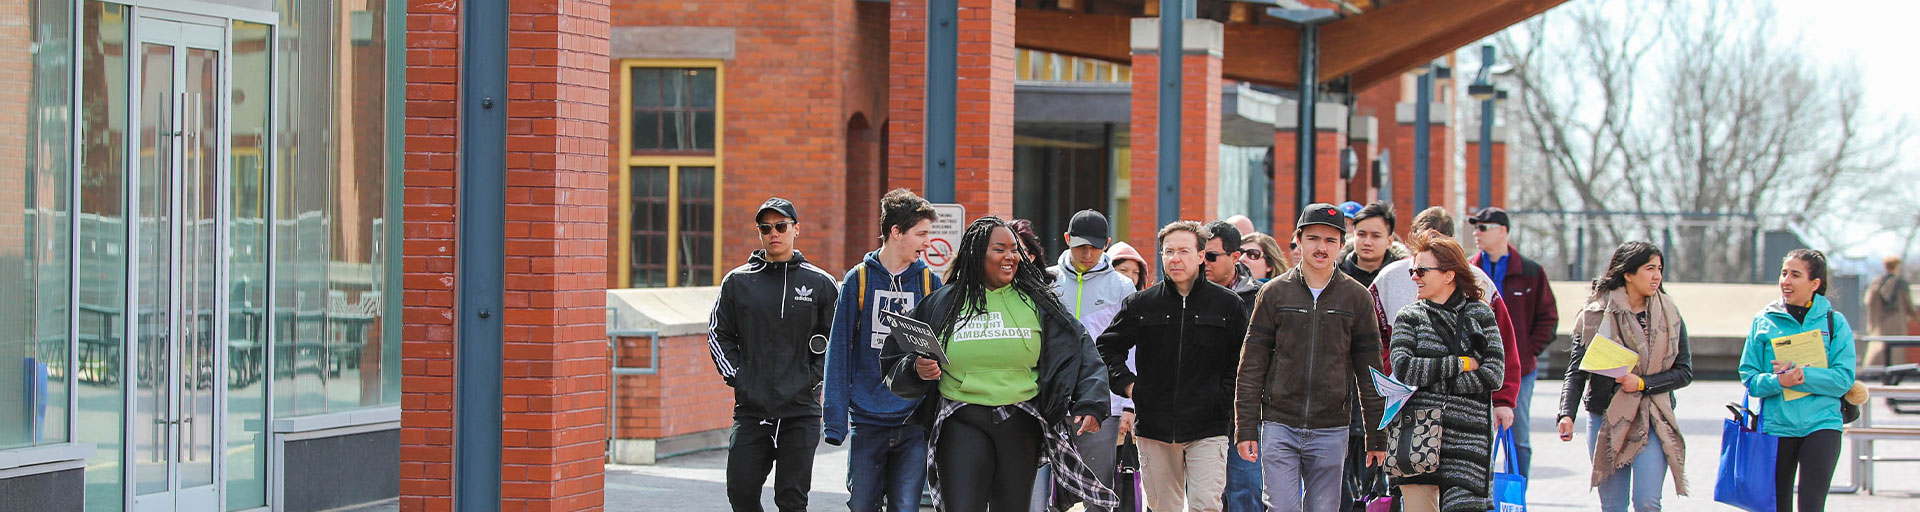 Group of people walking on campus